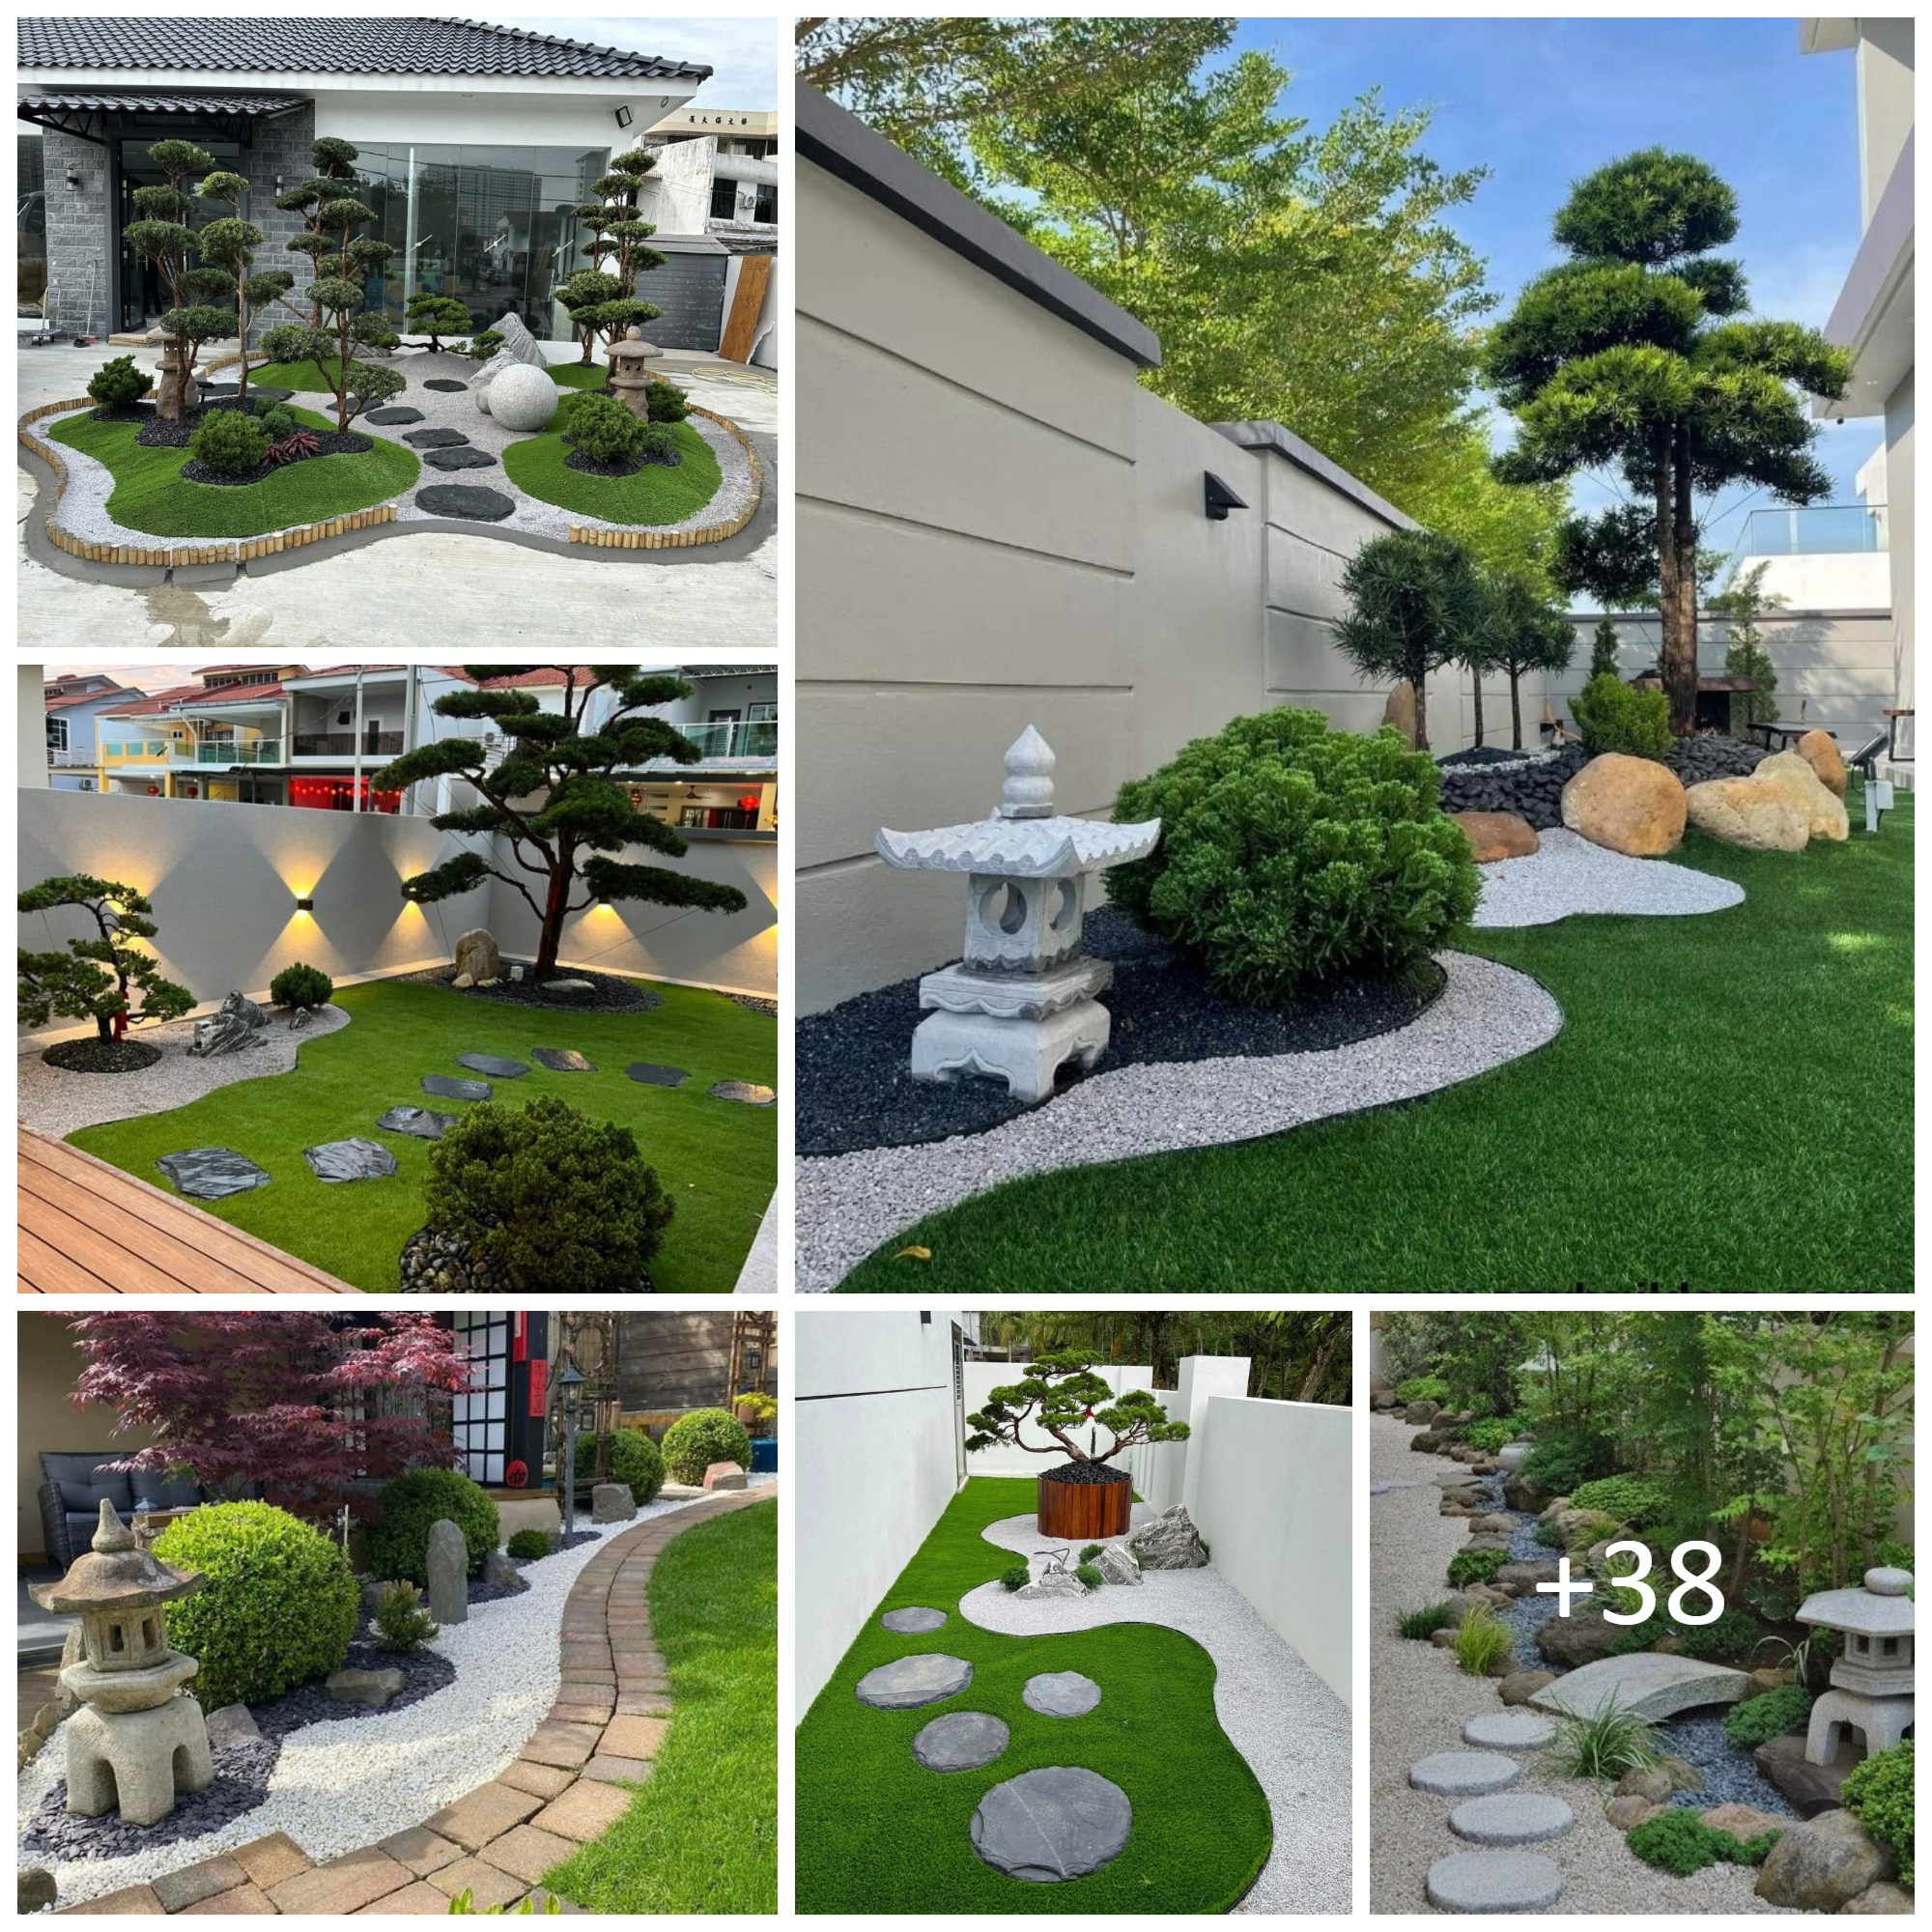 Japanese garden ideas that will bring Zen to your outdoor space